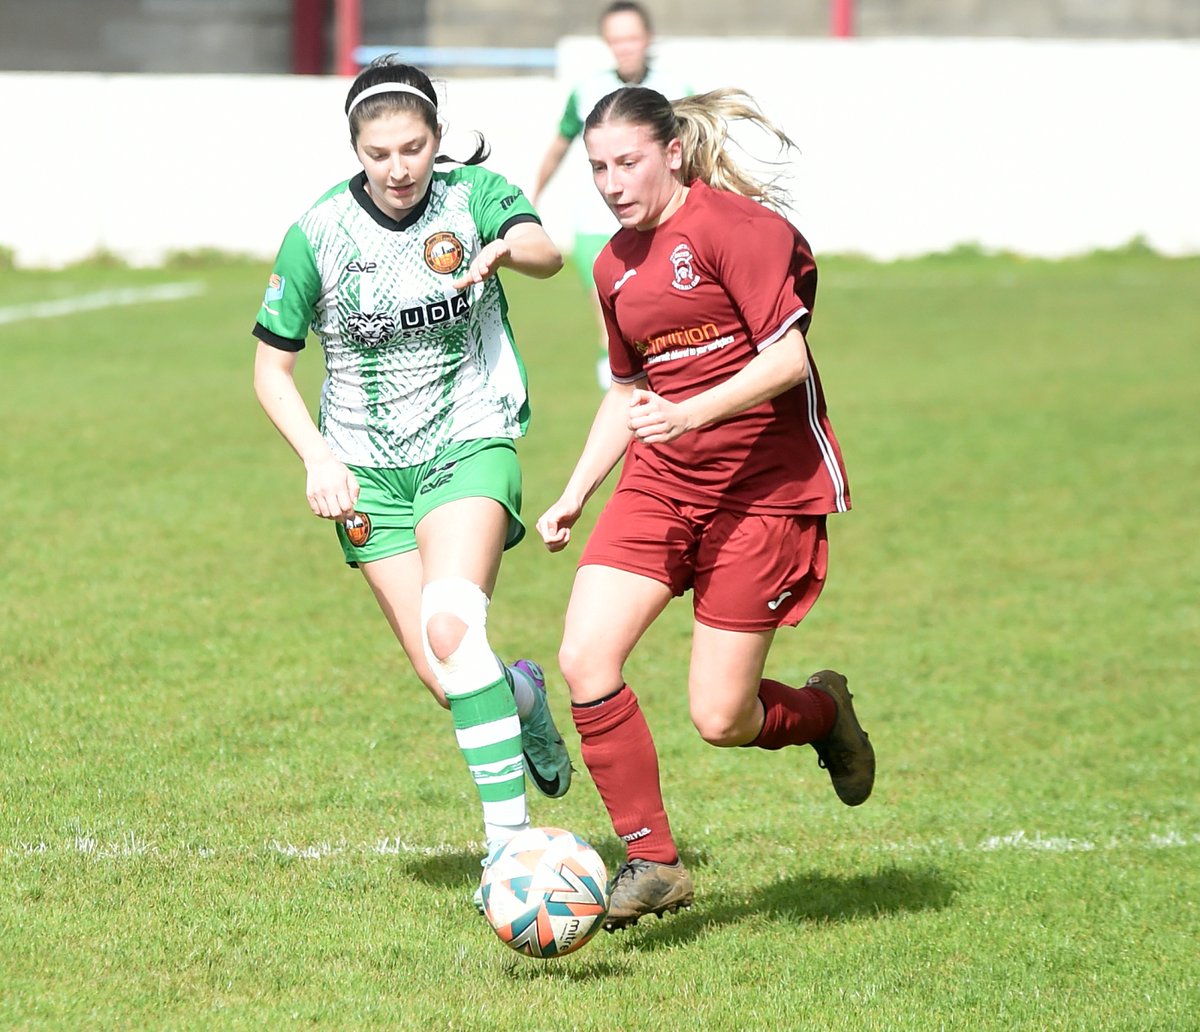 Our women's football round-up is online! @TownCirencester win @GCWFL title, Cup triumphs for @WsMAFCWomen1 and @Bitton_Ladies Development, @stvallierladies win again, @LonglevensLFC narrow gap, @CheddarLadies boost runners-up chance and more! 
bristol-soccerworld.com/page57.html